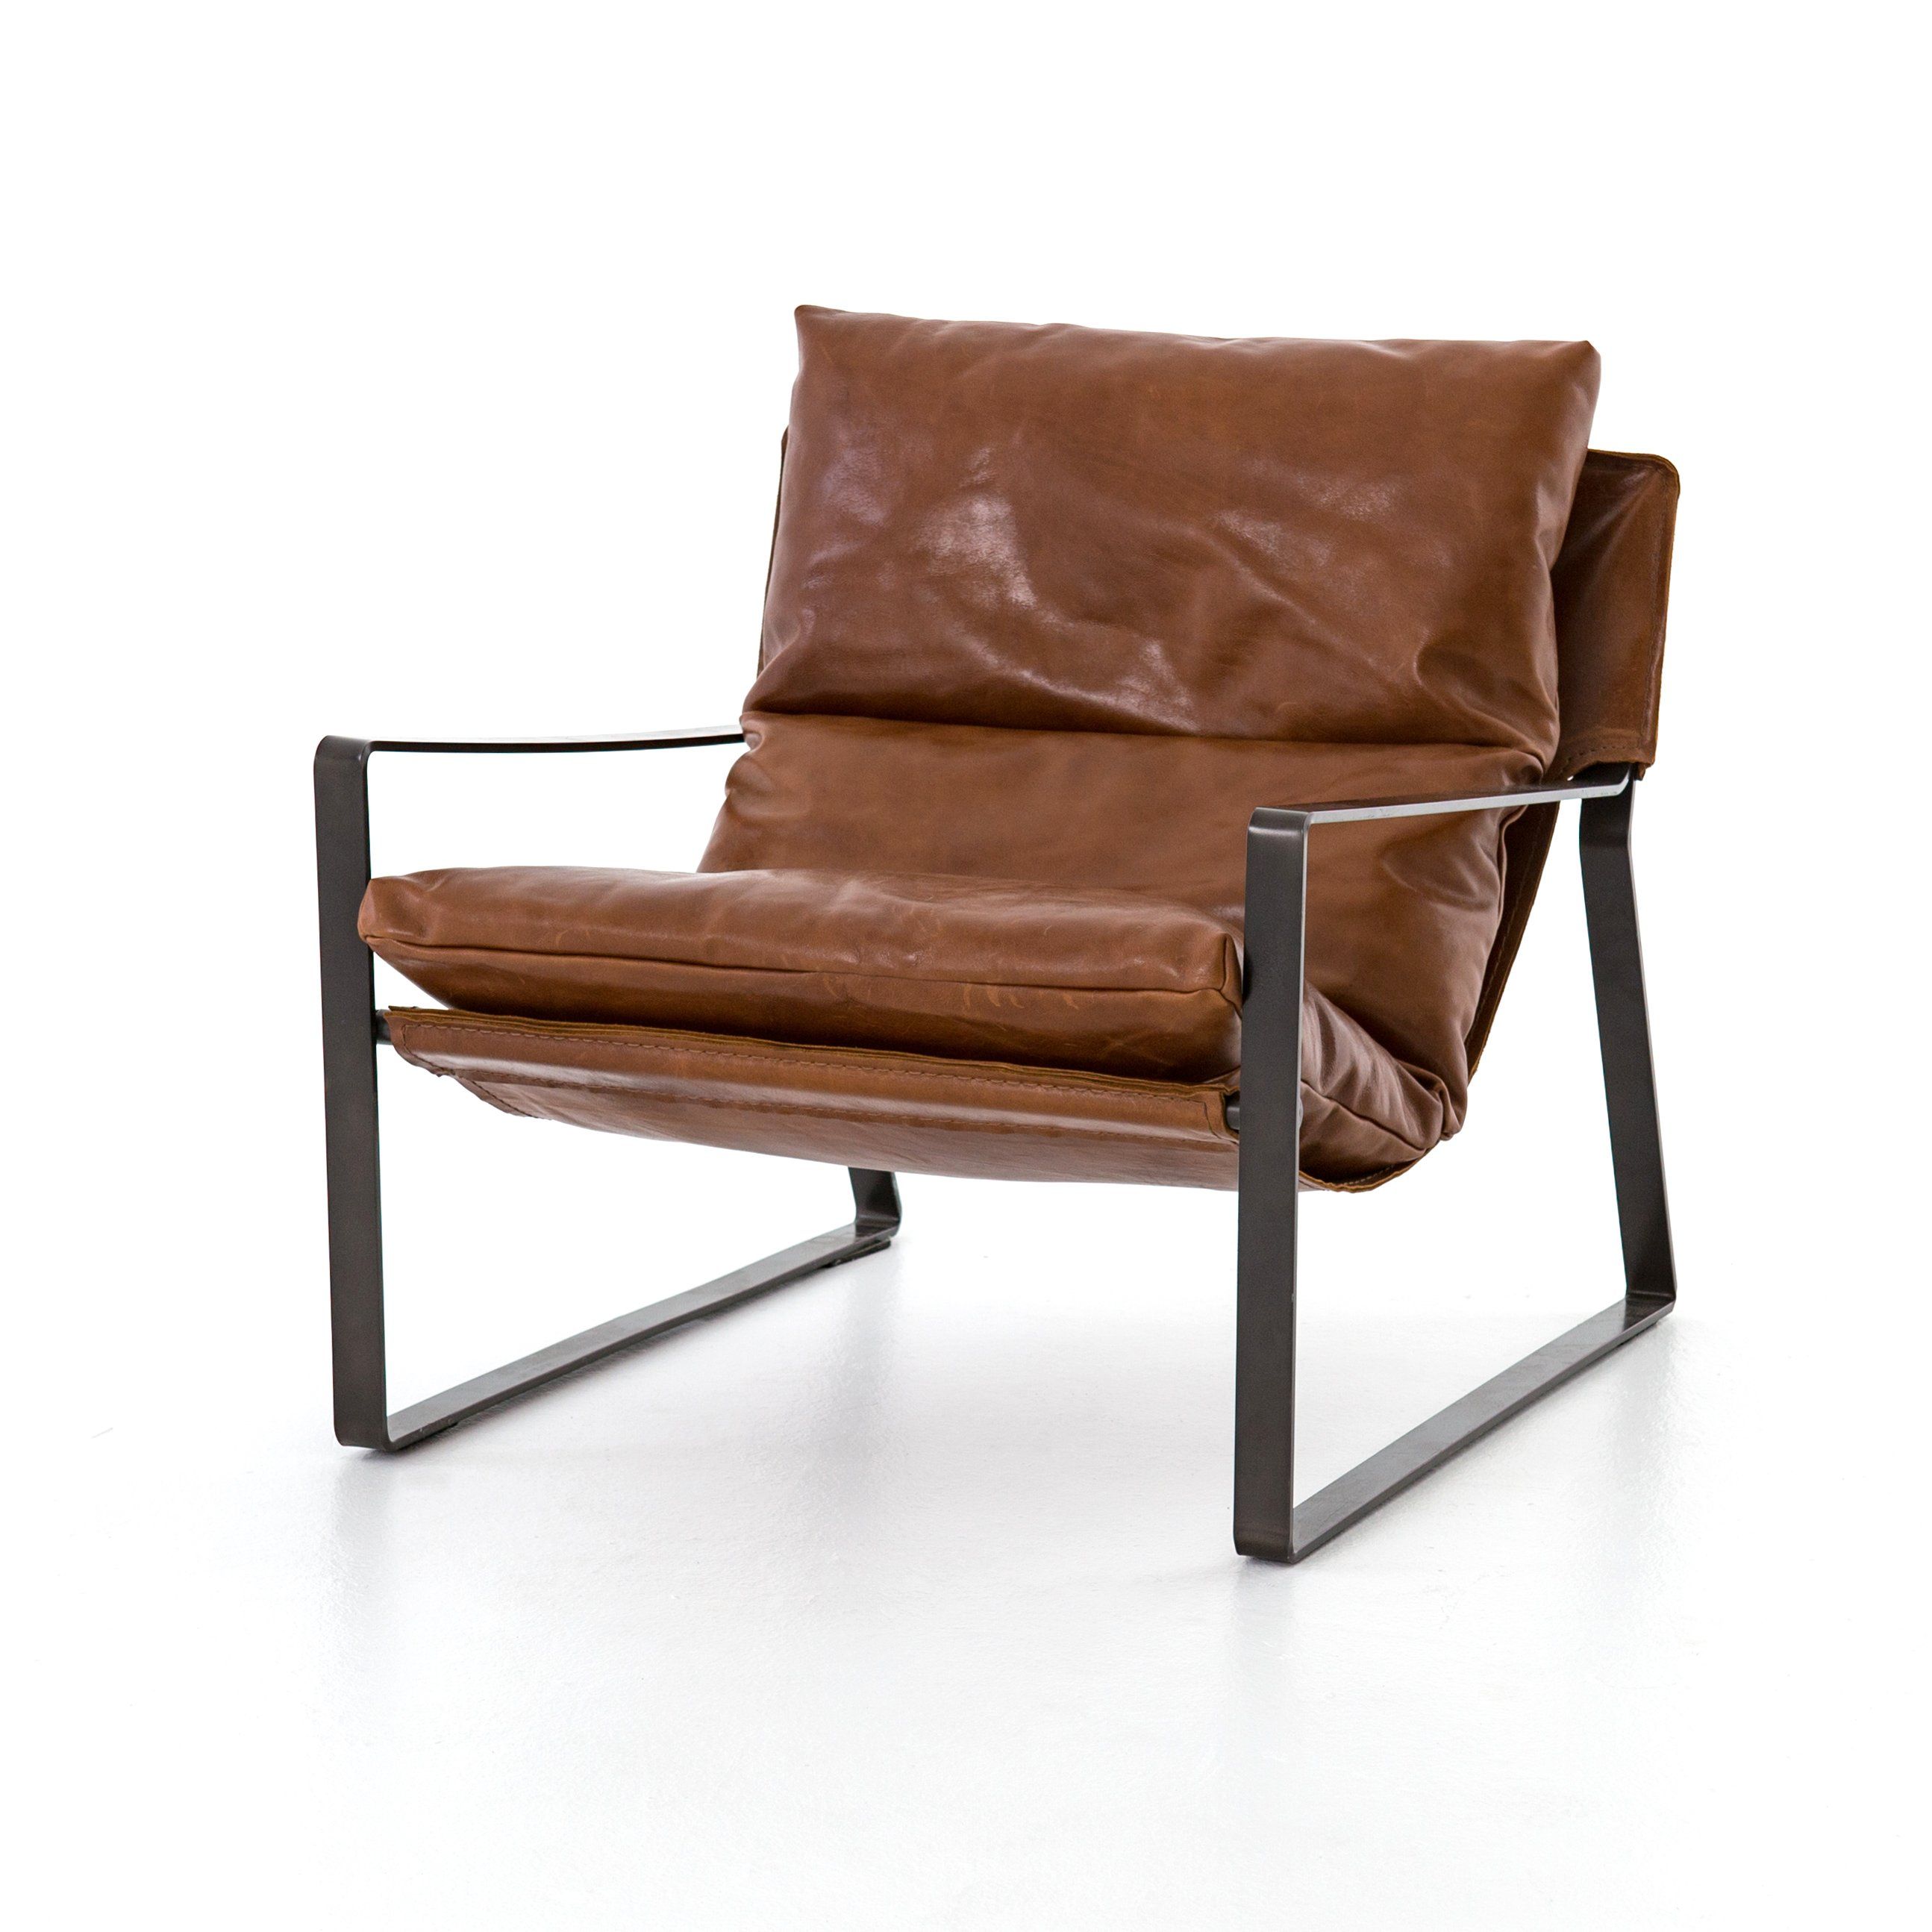 Emmett Sling Chair  Dakota Tobacco In 2018 | Tv Room | Pinterest Pertaining To Swivel Tobacco Leather Chairs (View 9 of 25)